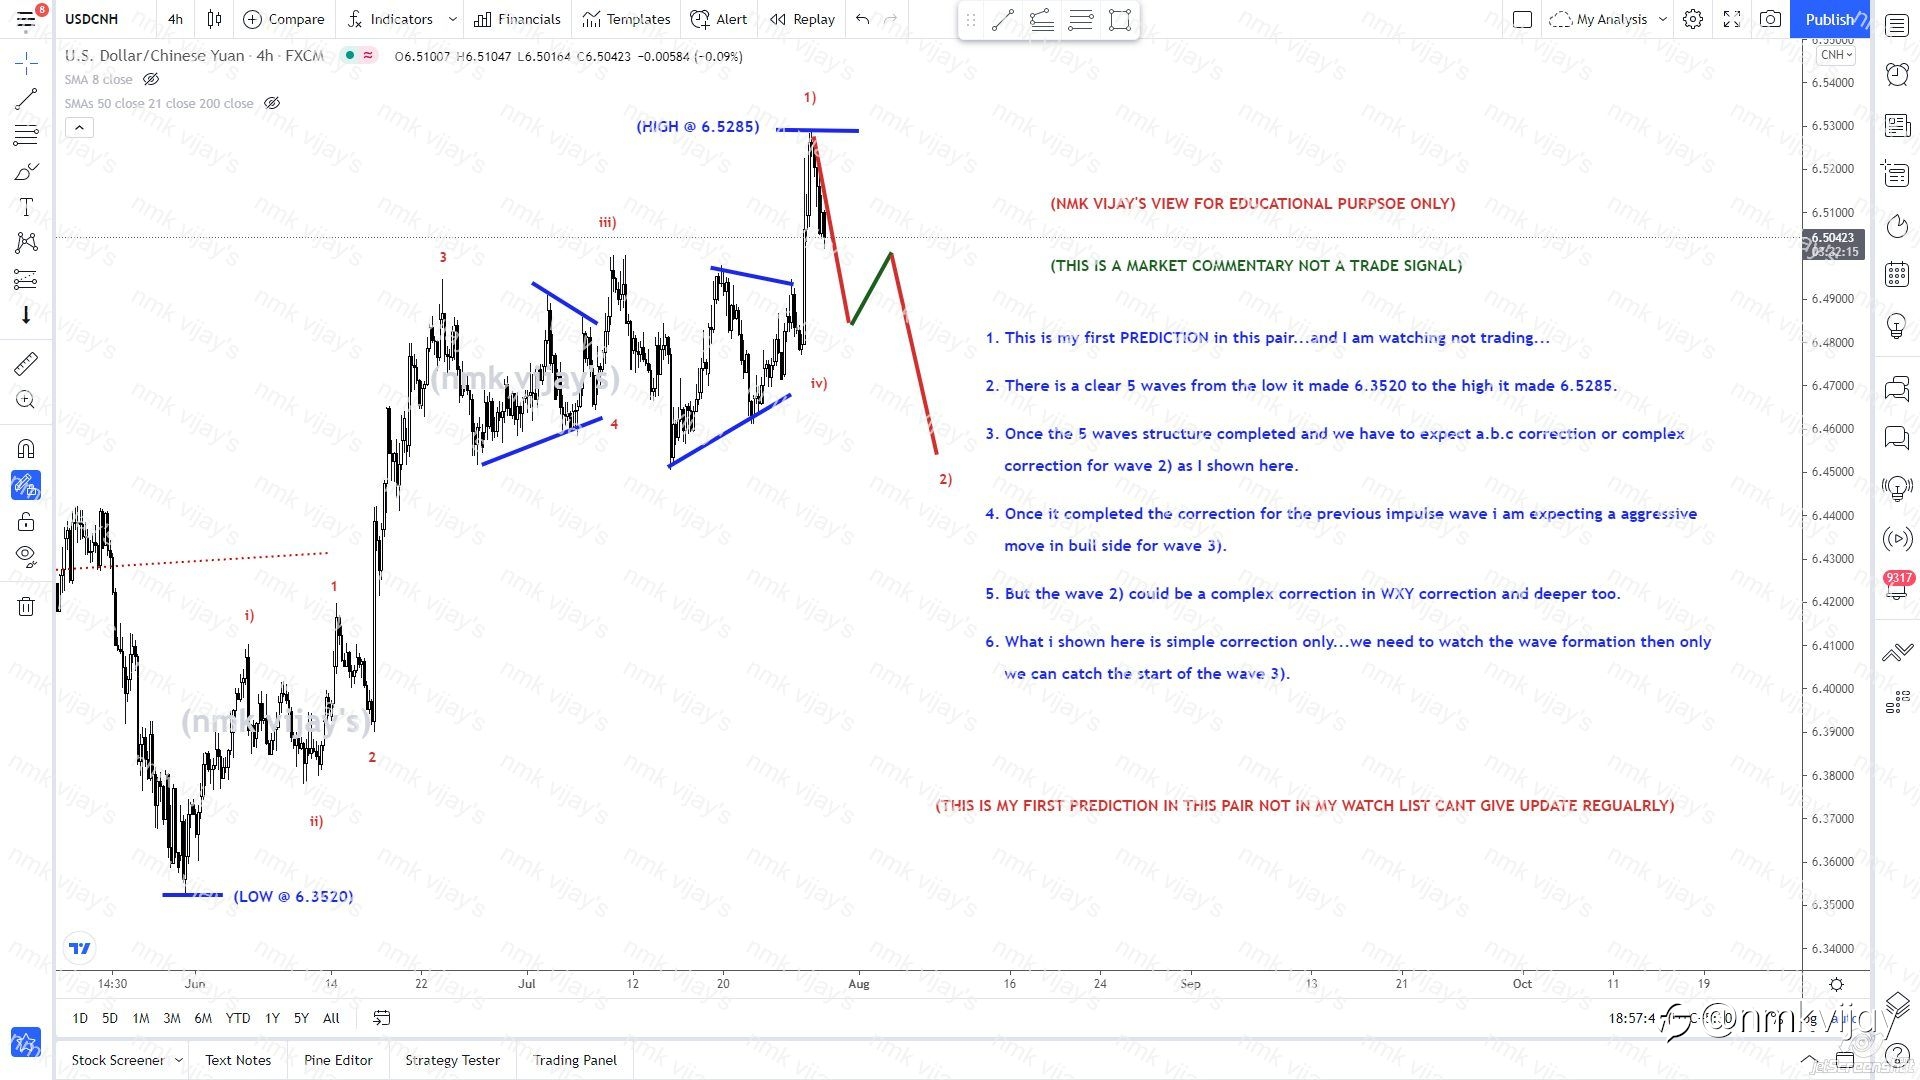 USDCNH-5 waves completed for wave 1) and expecting wave 2) ...